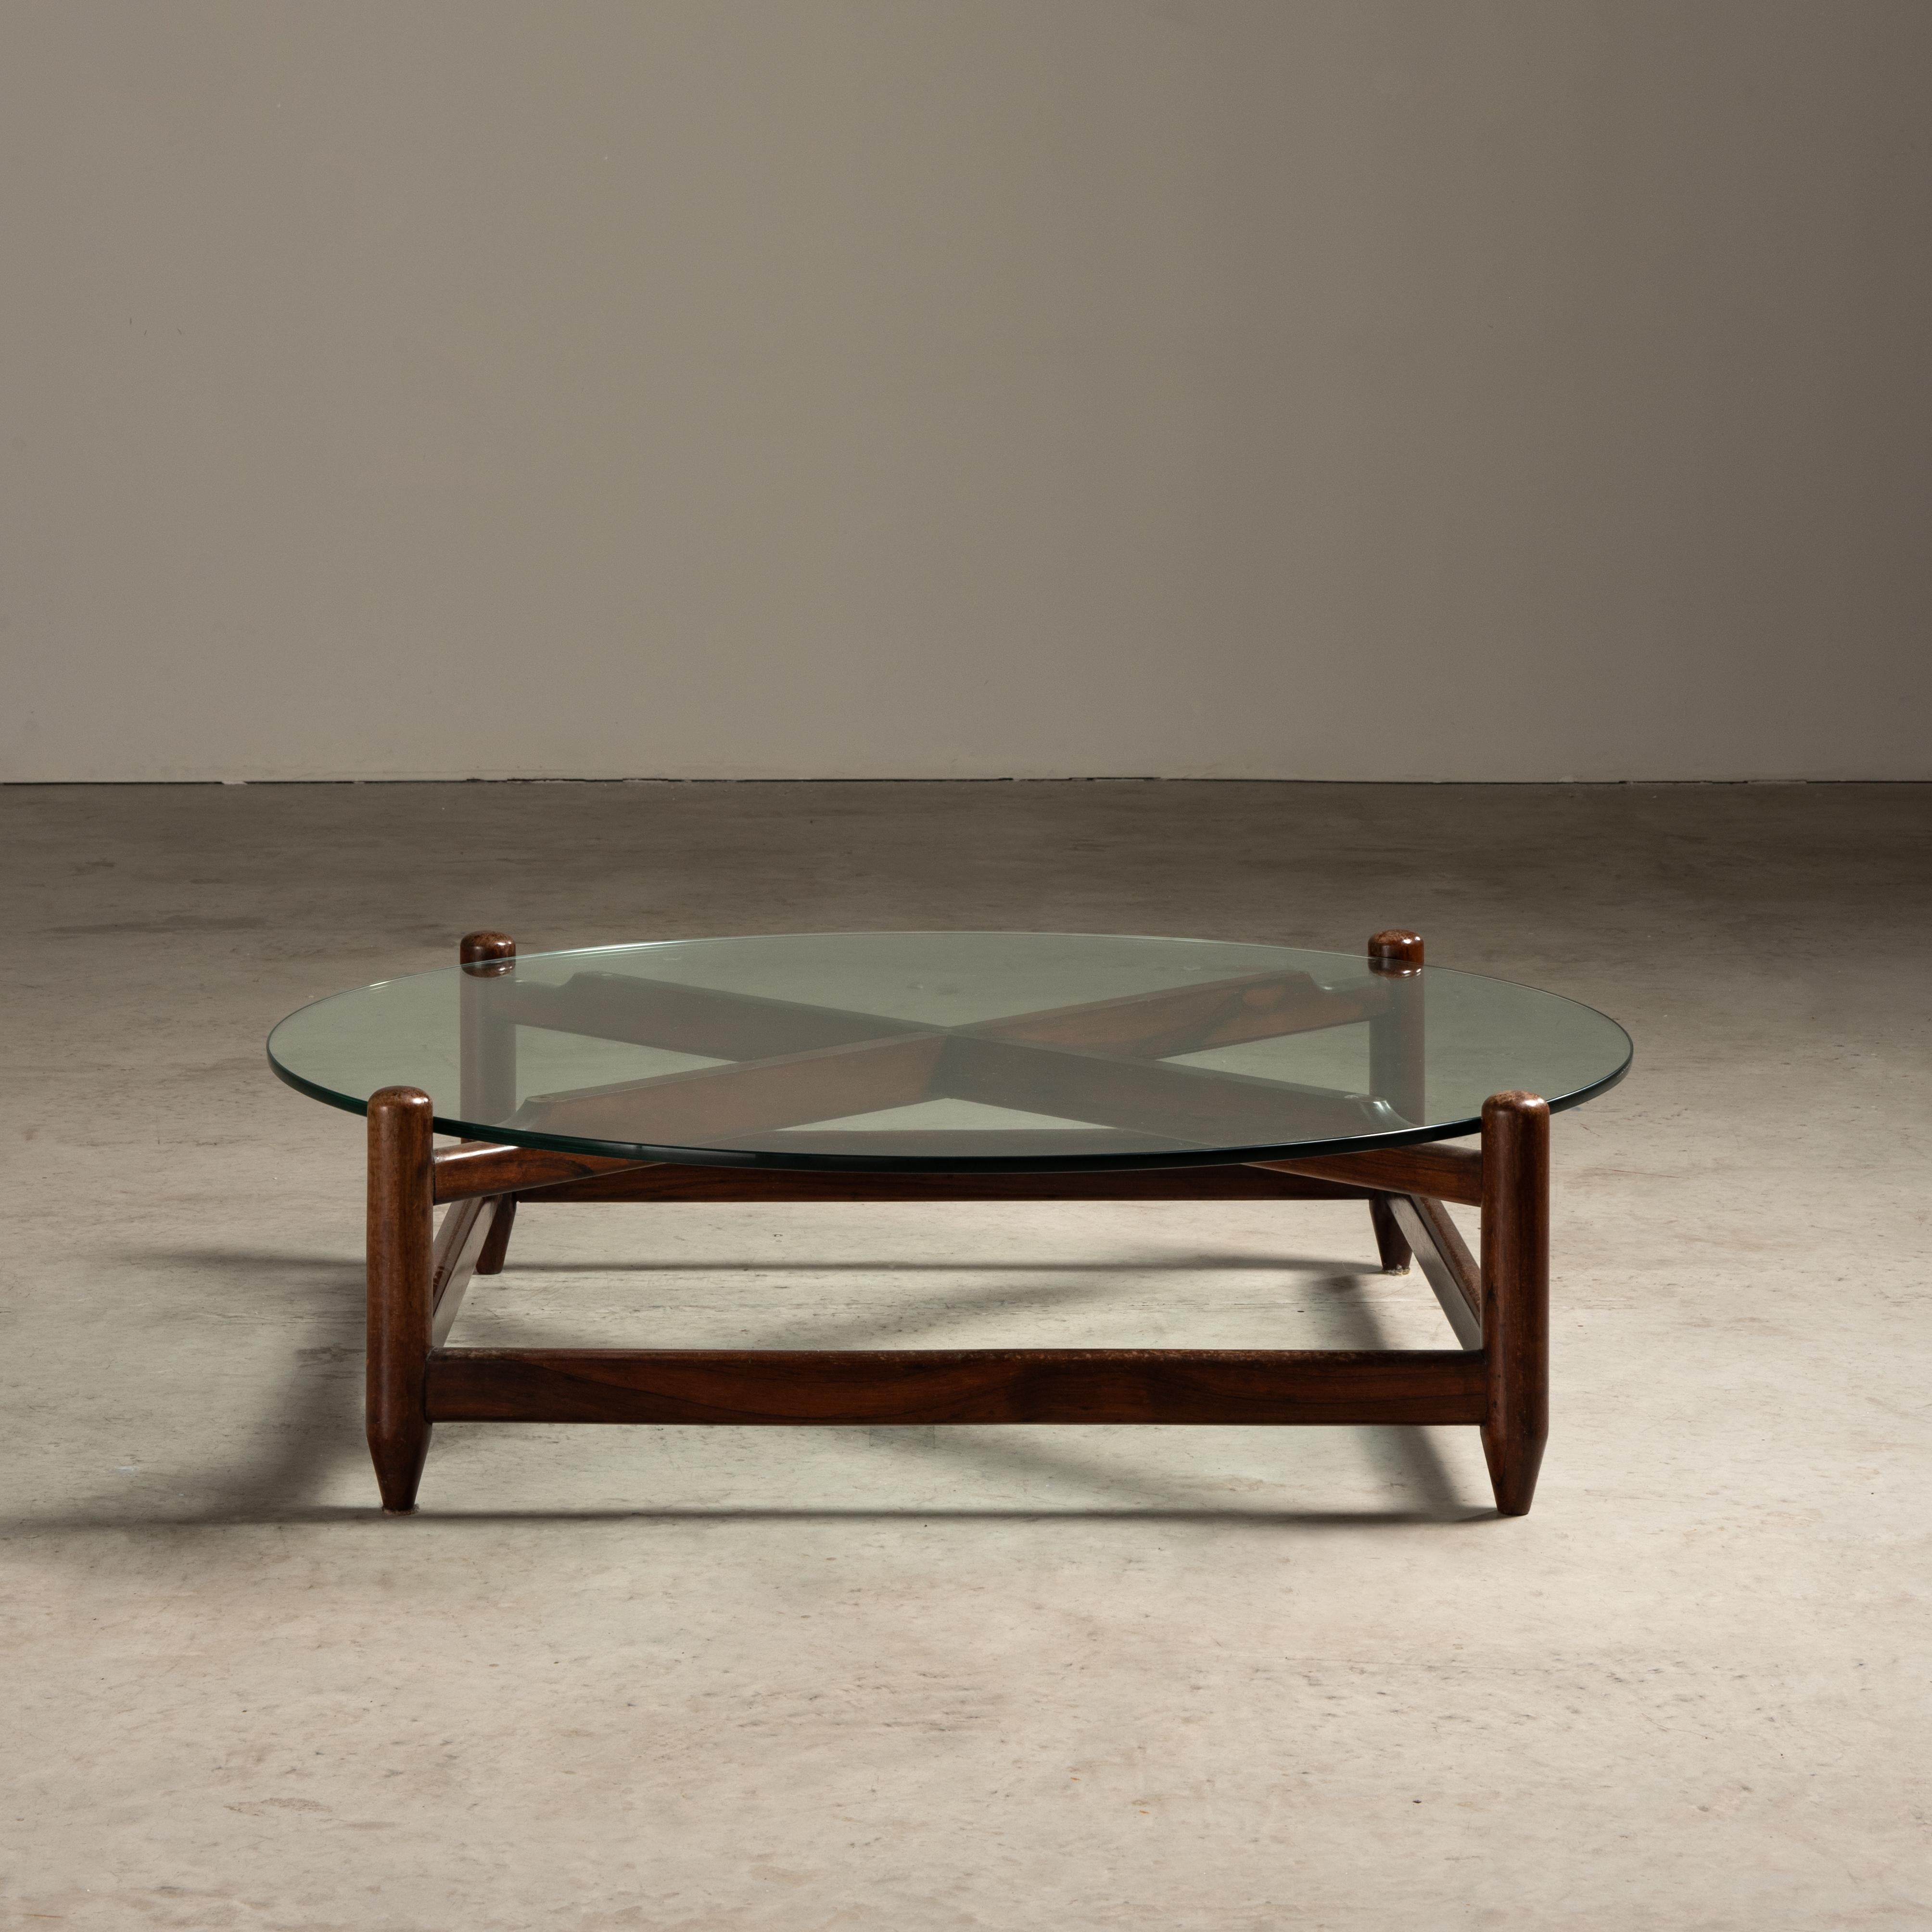 This center table from Móveis Cantu, made with wood and glass, is a fine example of Brazilian mid-century design. The table features a circular glass top that sits comfortably on a wooden base. The base is constructed of rich, warm-toned wood, which